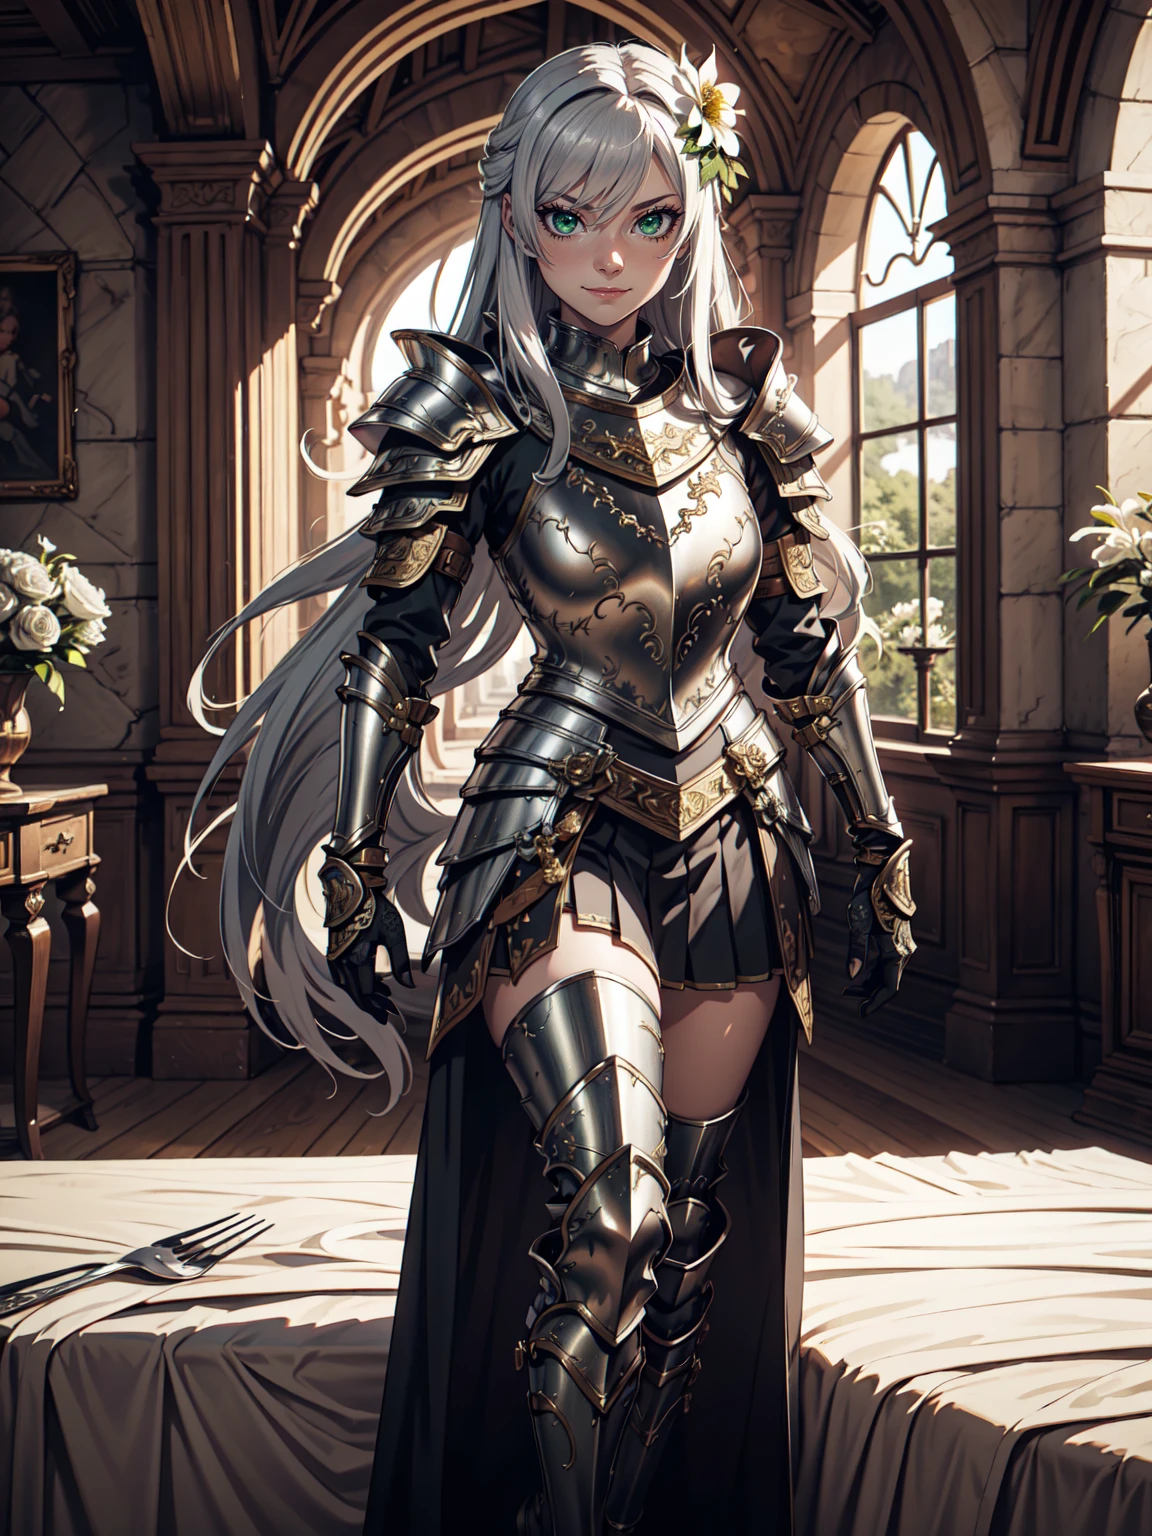 Ultra High Definition, Ultra High Quality, Hyper Definition, Hyper Quality, Hyper Detailed, Extremely Detailed, Perfectly Detailed, 8k, 1 Anime  Female, Long Silver Hair,  Noble Armor,  Luxury Pleated Skirt, Gloves, Solid Green Eyes, Cheerful Expression, White Flower Barrette,  Armored With Full Coverage Noble Plate Armor, Leg Armor,  Mansion Room Panoramic Background